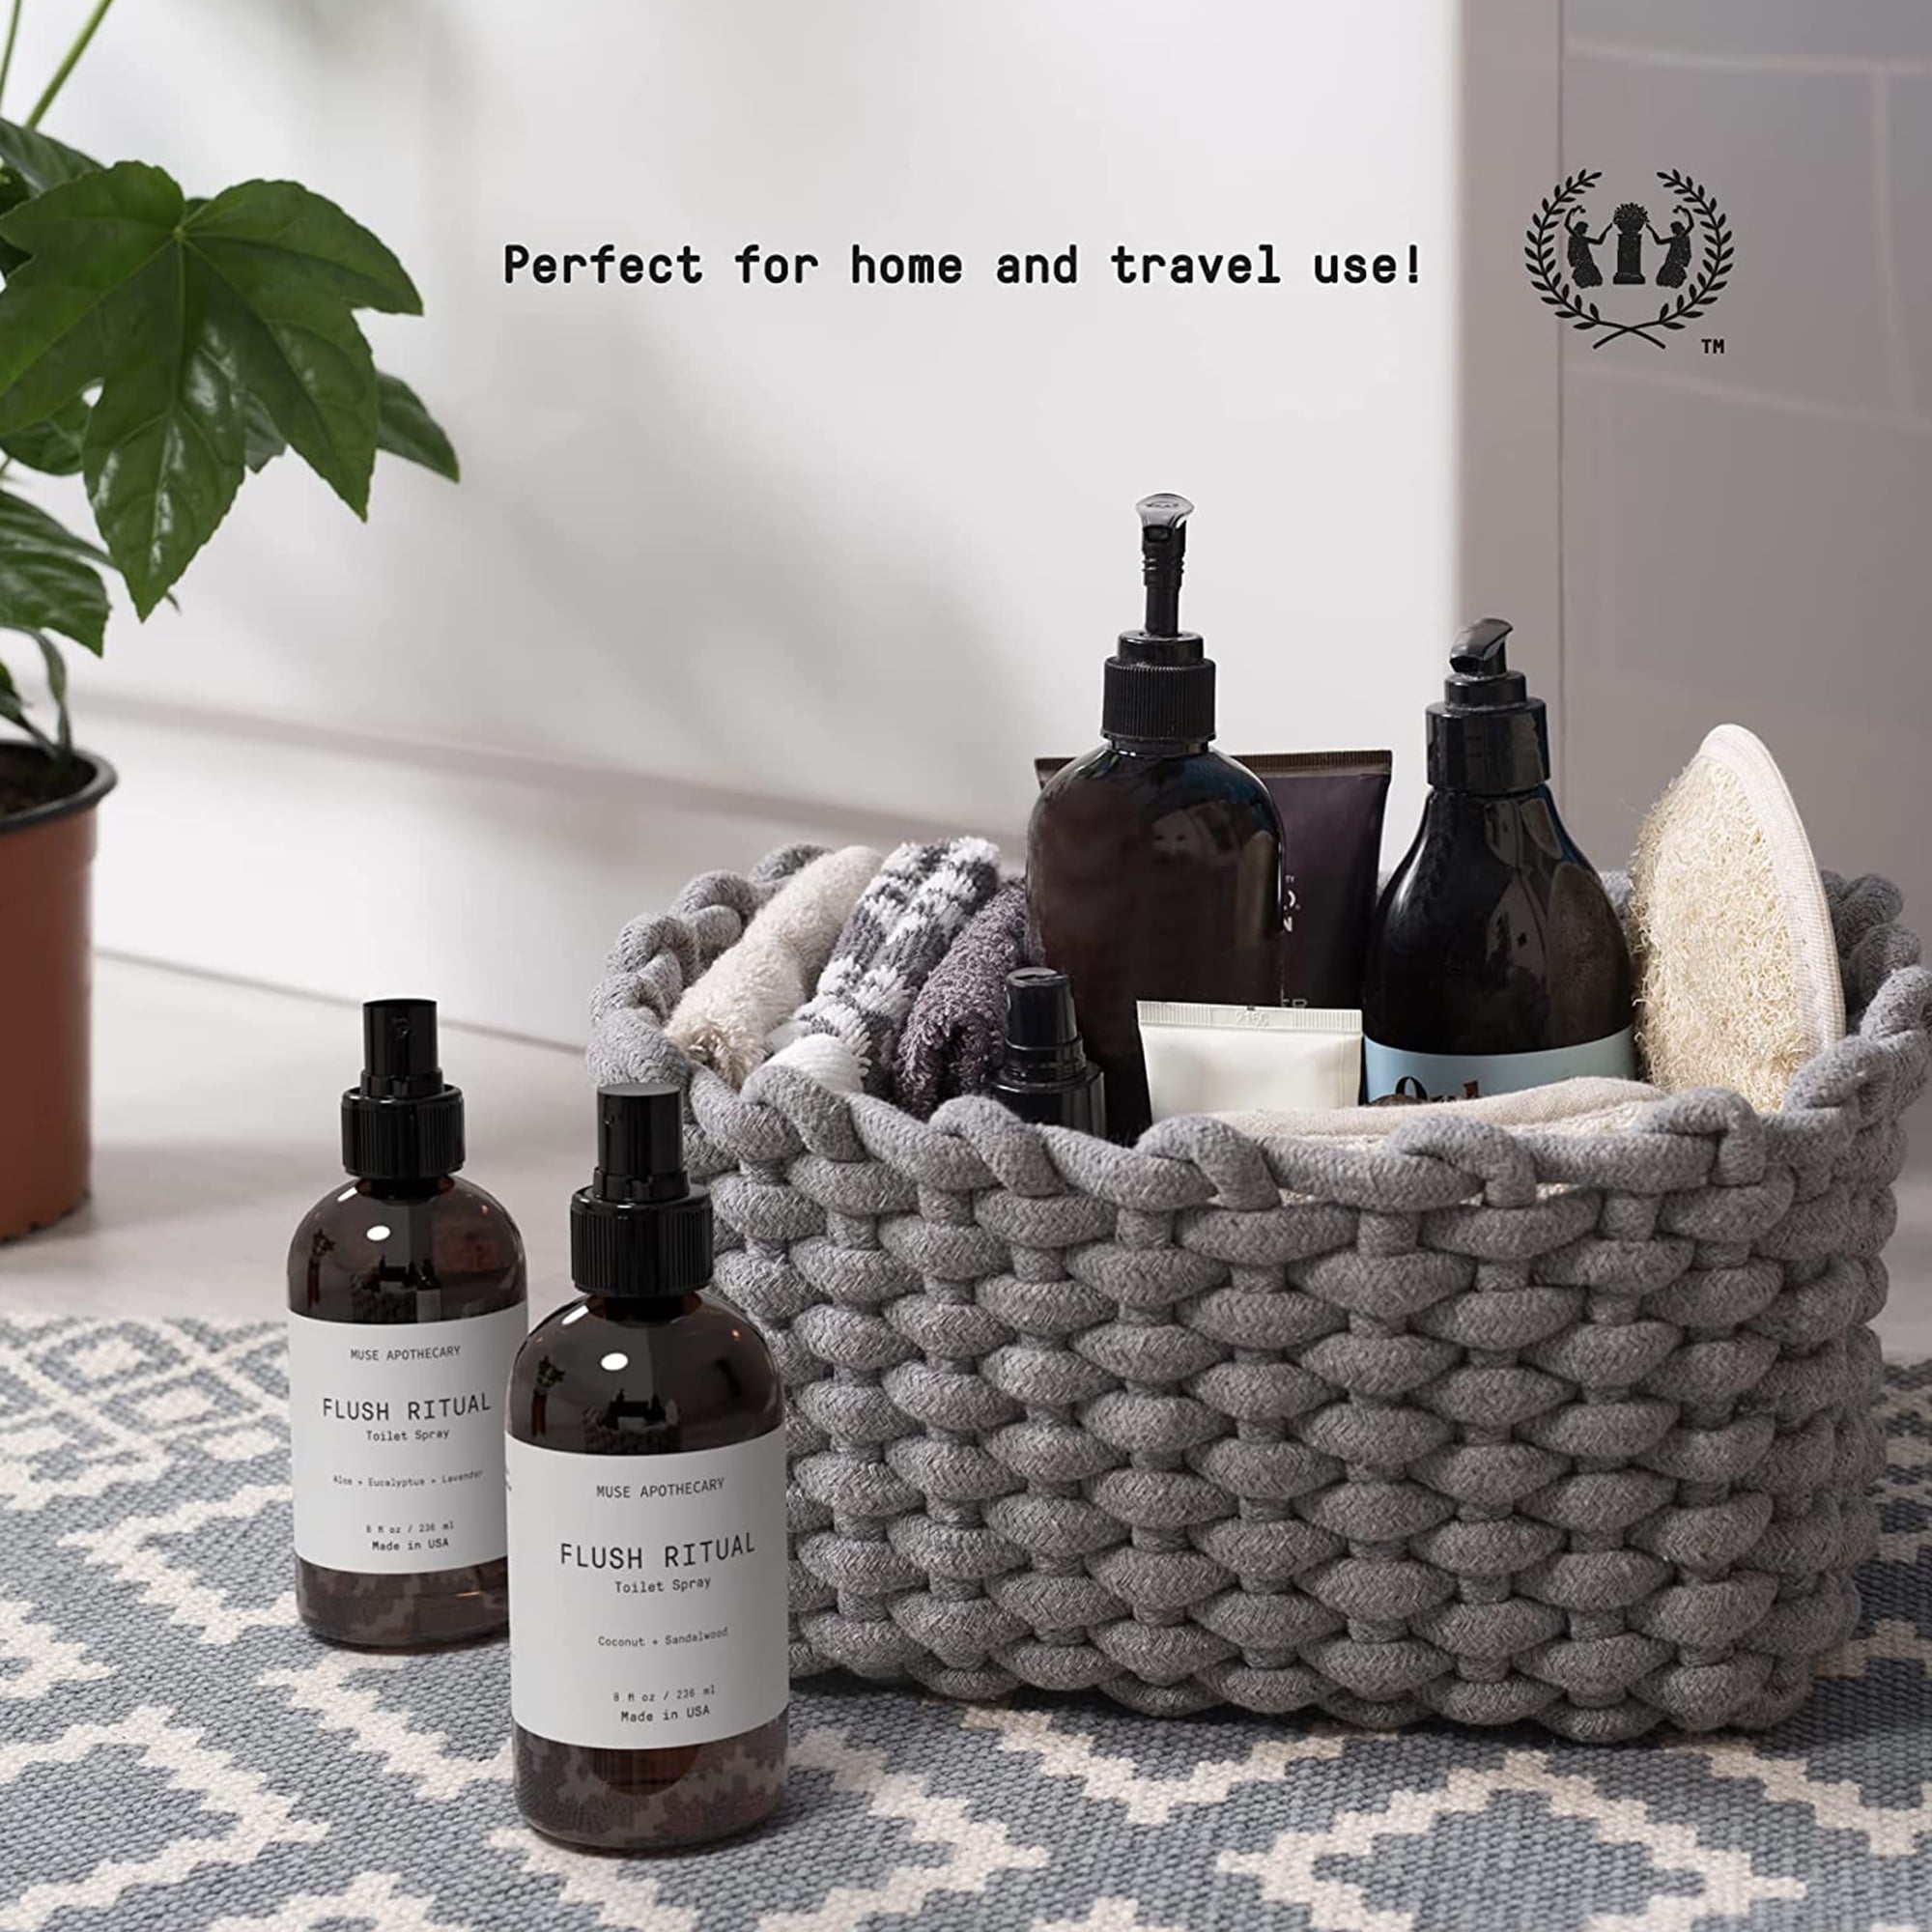 Comfort and Beauty with The Lovely Muse Apothecary – Solidly Scented